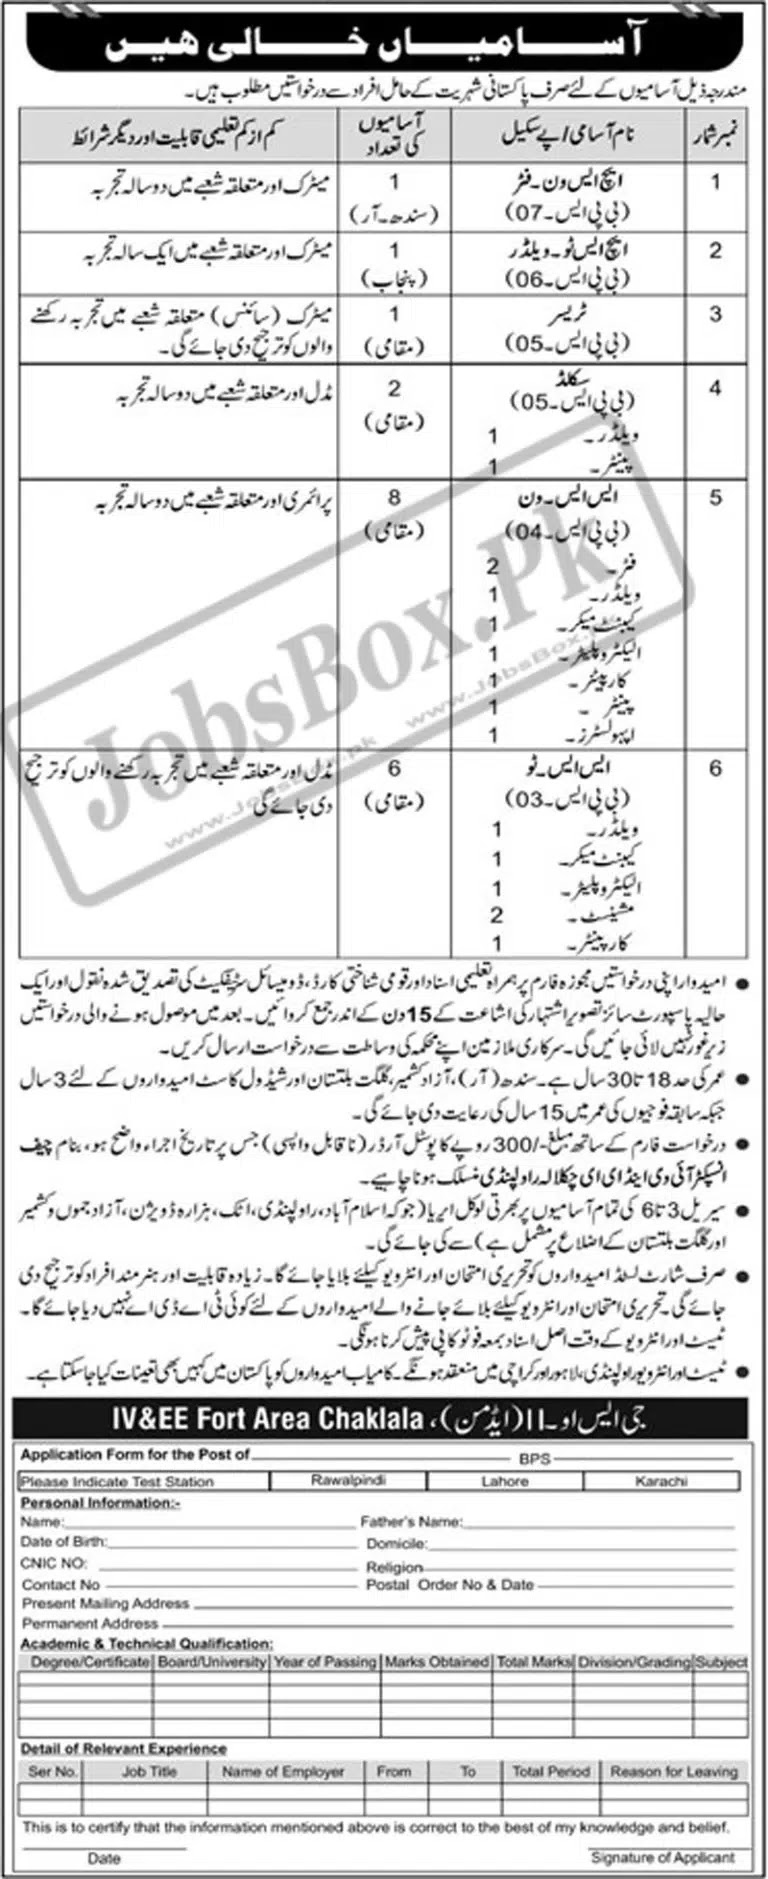 Pak Army IV&EE Fort Area Chaklala Jobs 2022 in Pakistan